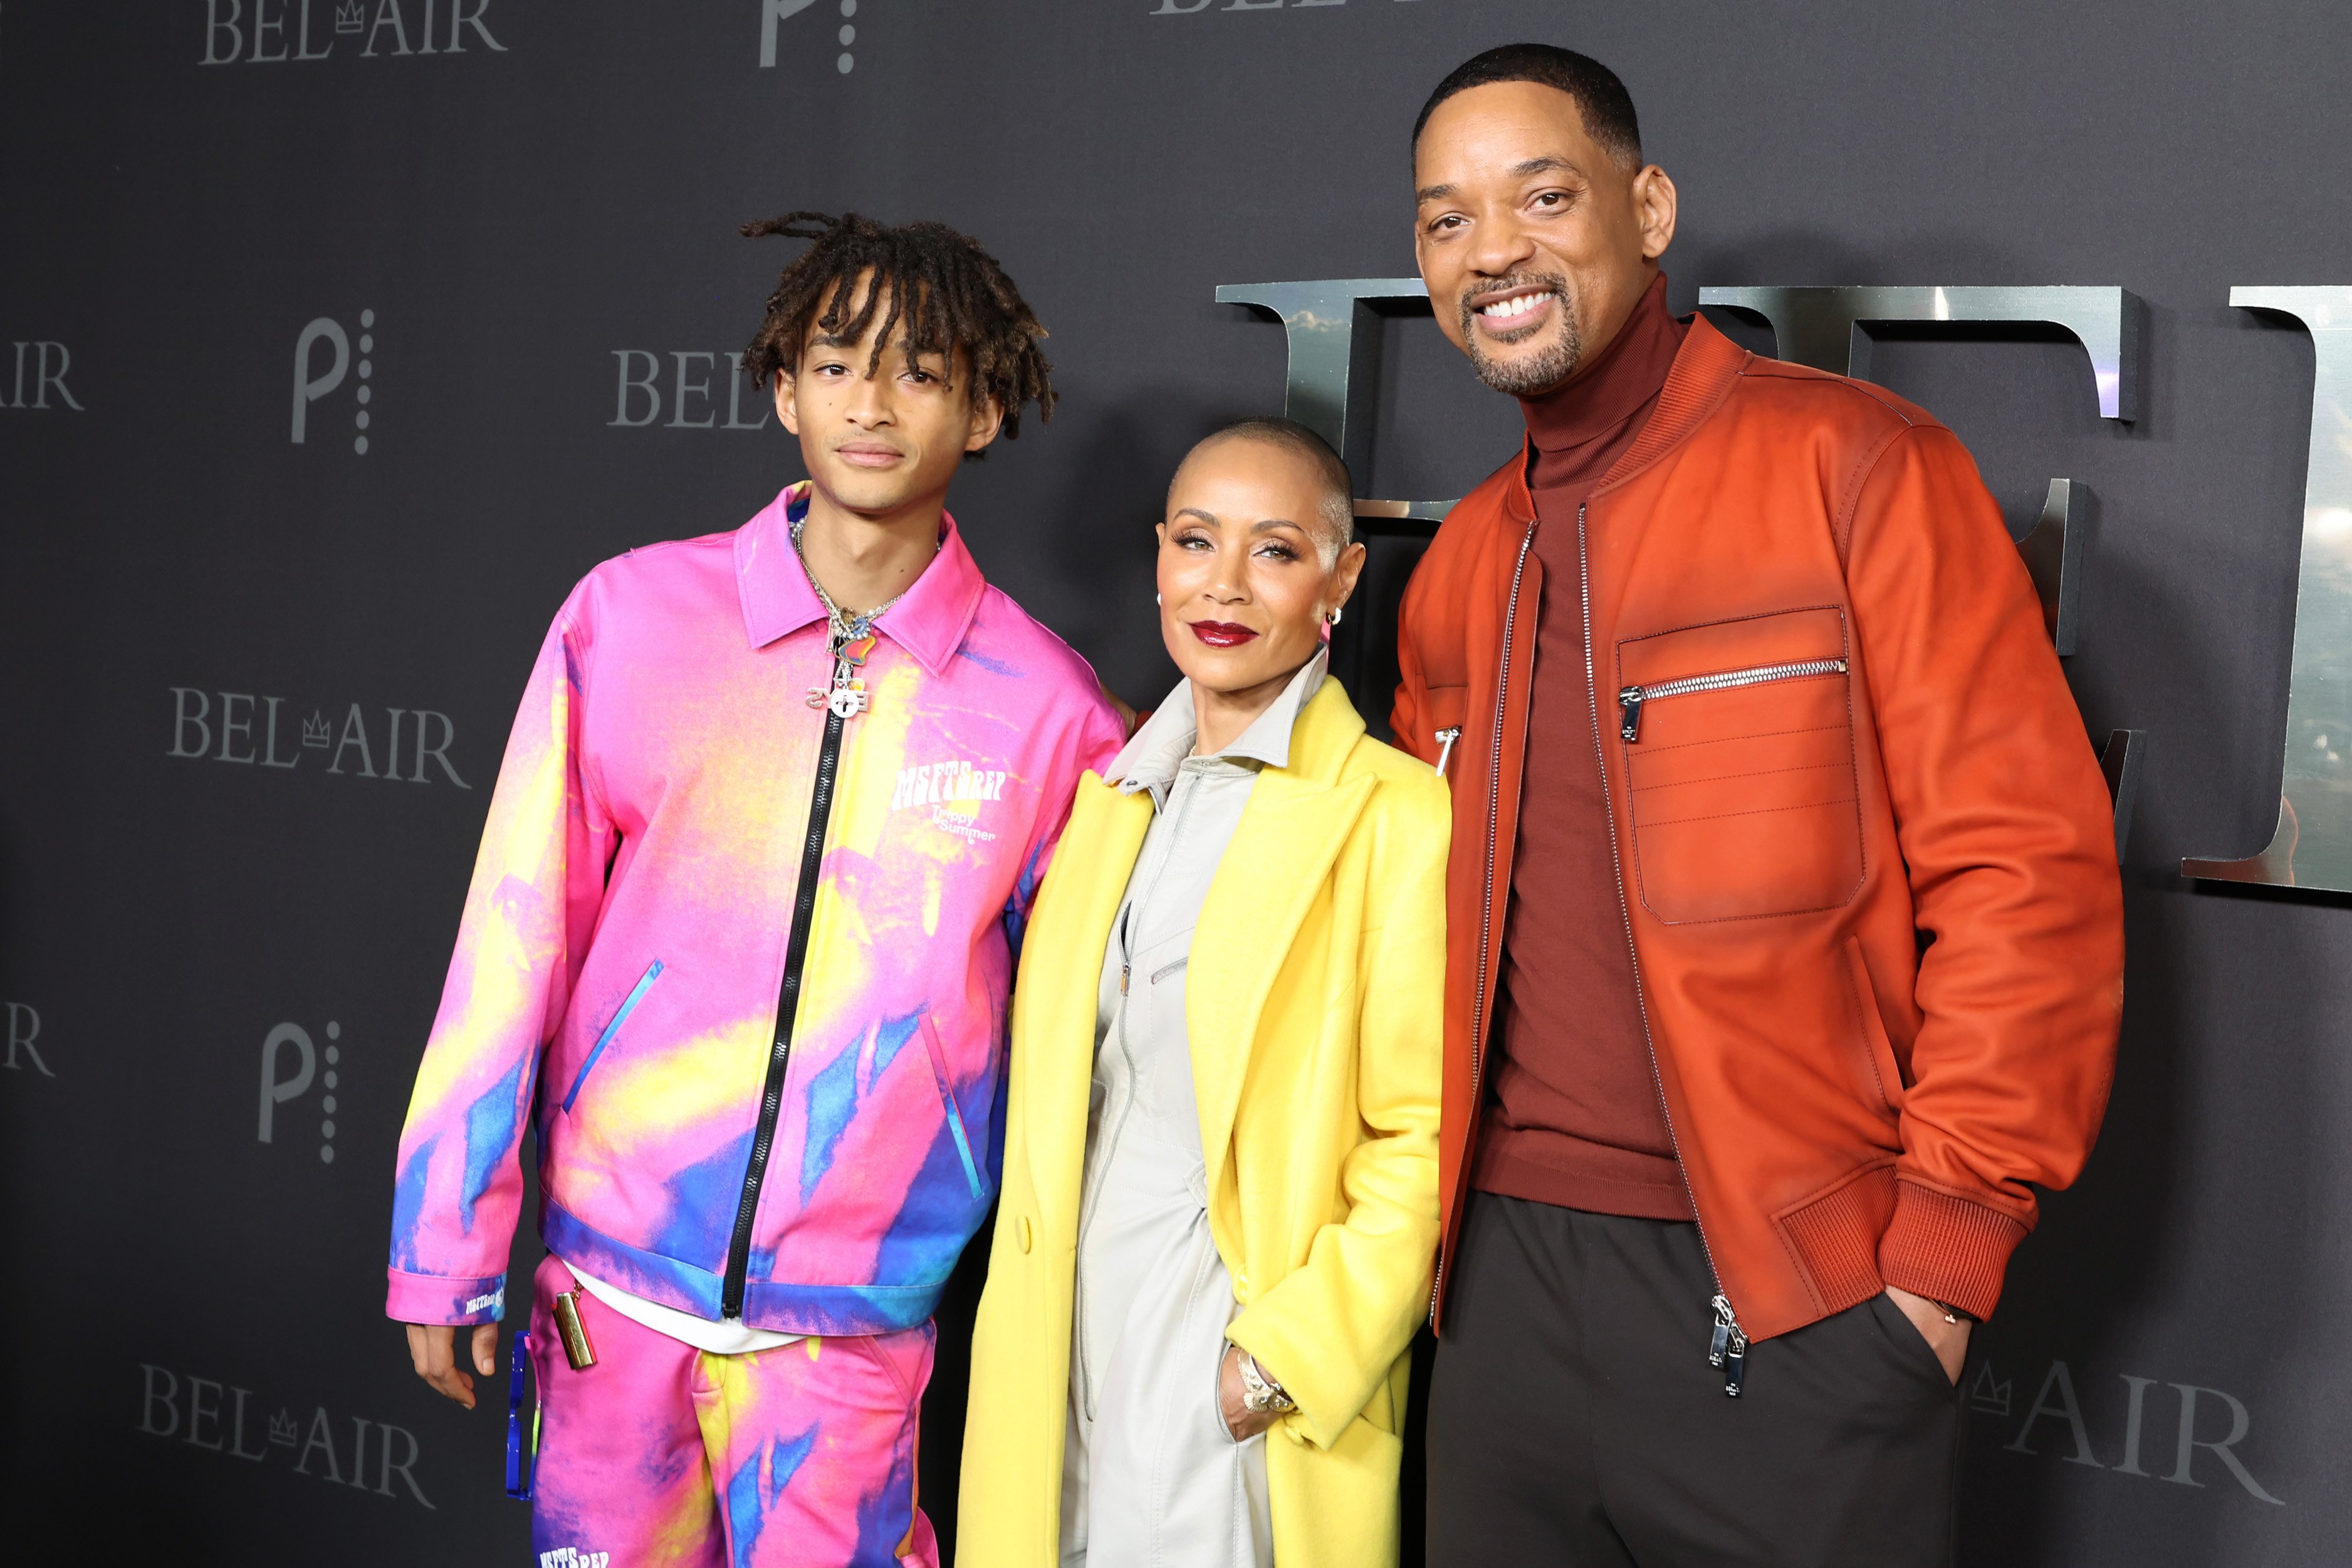 Jaden Smith, who owns a Hidden Hills home, poses on the carpet at the BEL-AIR premiere party with parents Will Smith and Jada Pinkett Smith